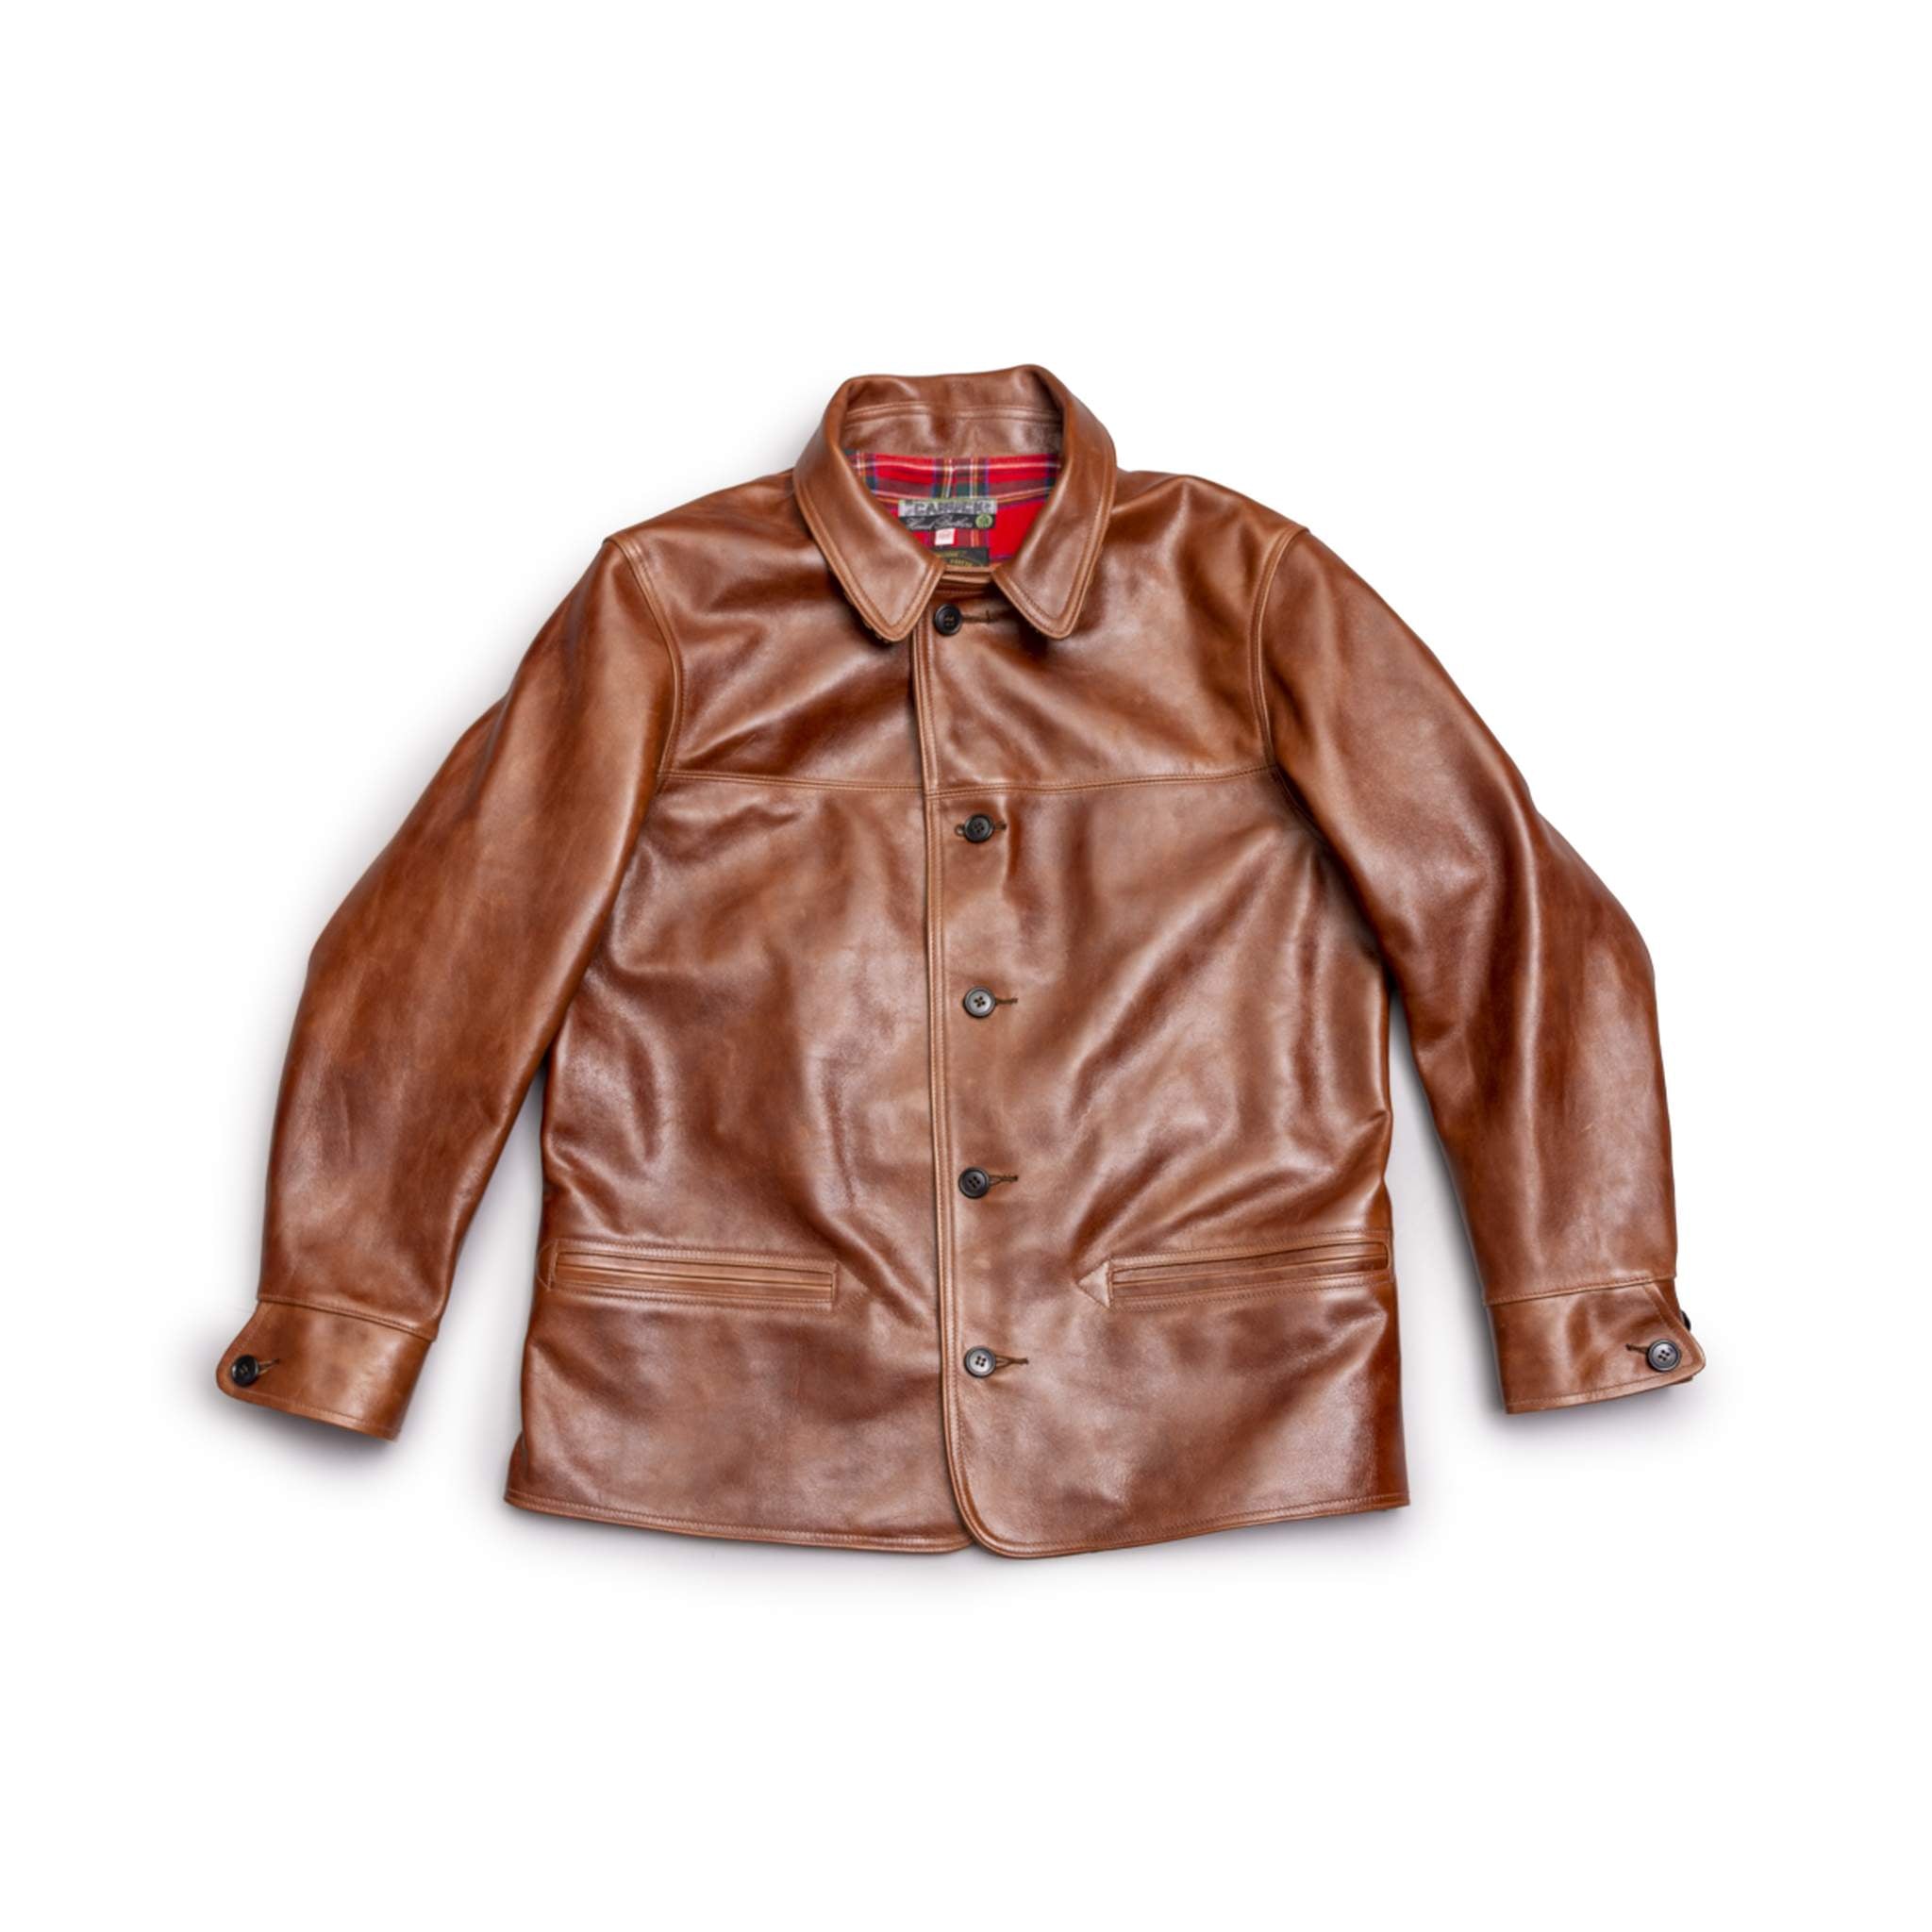 The Canuck Horsehide Leather Jacket from Himel Bros. - Himel Bros